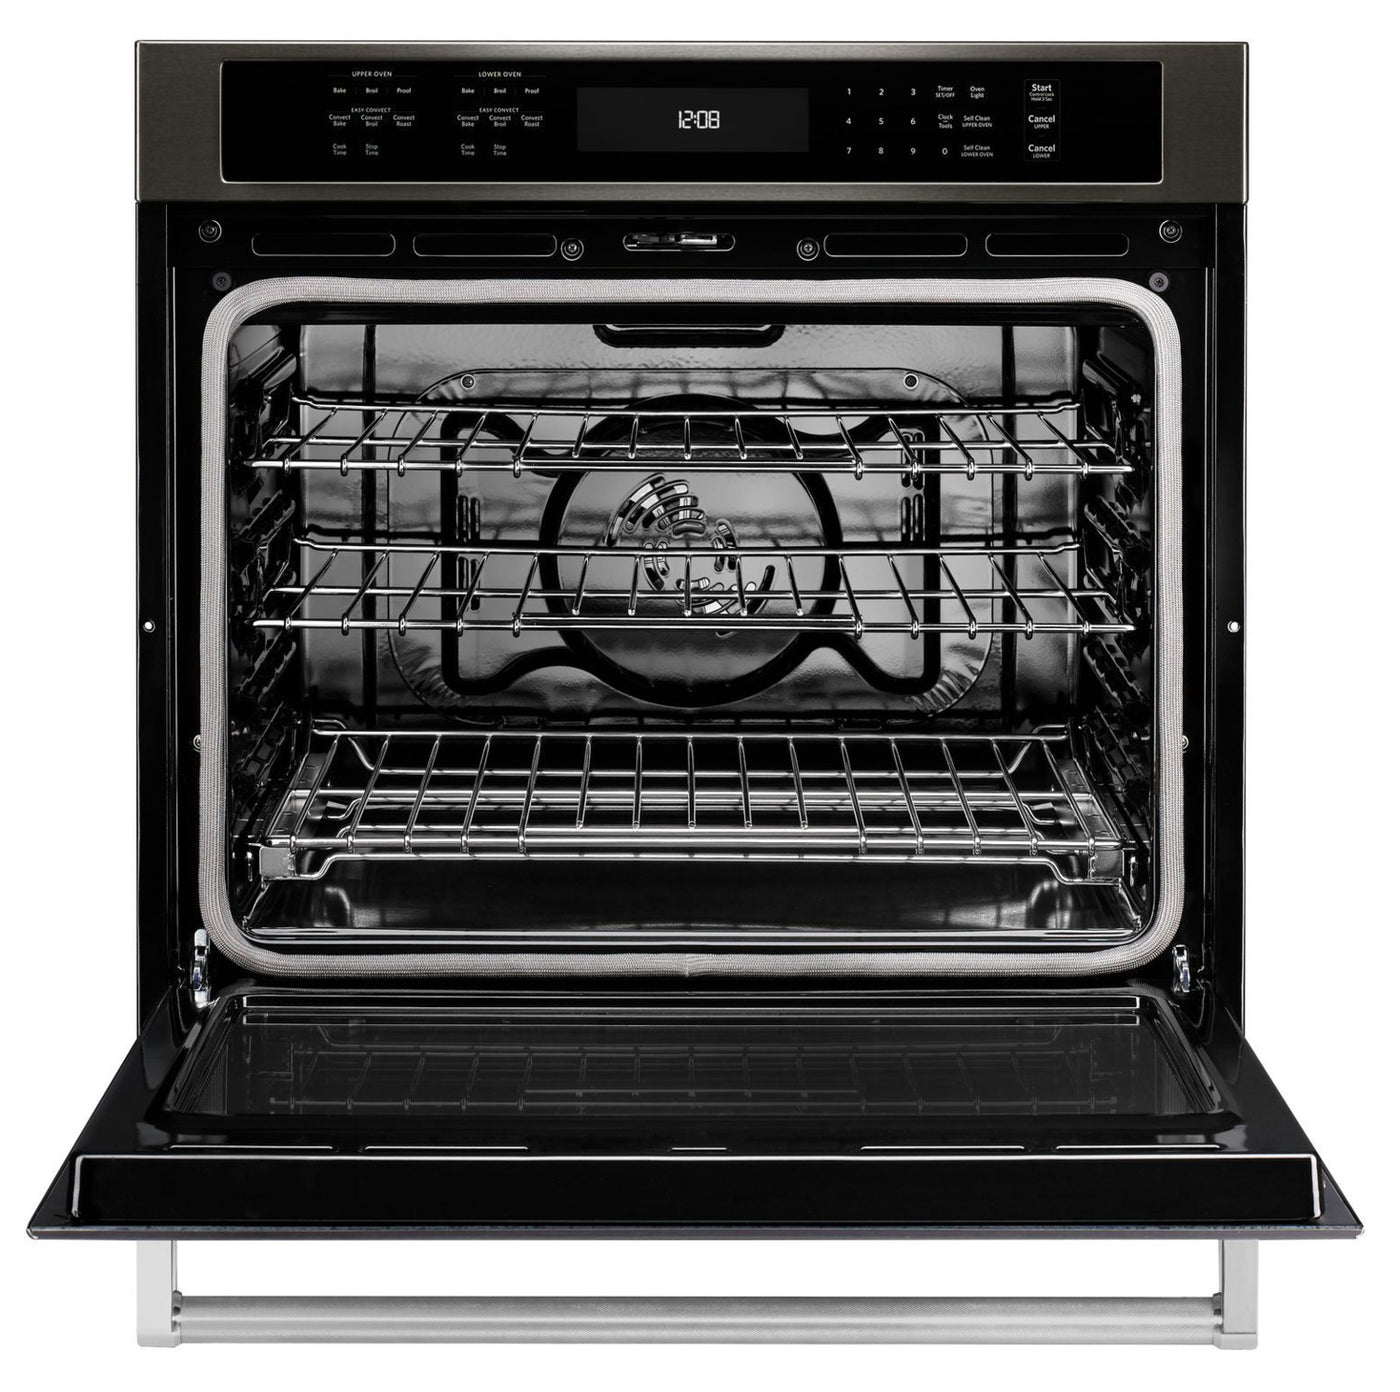 KitchenAid Black Stainless Steel Convection Wall Oven (5.0 Cu. Ft.) - KOSE500EBS